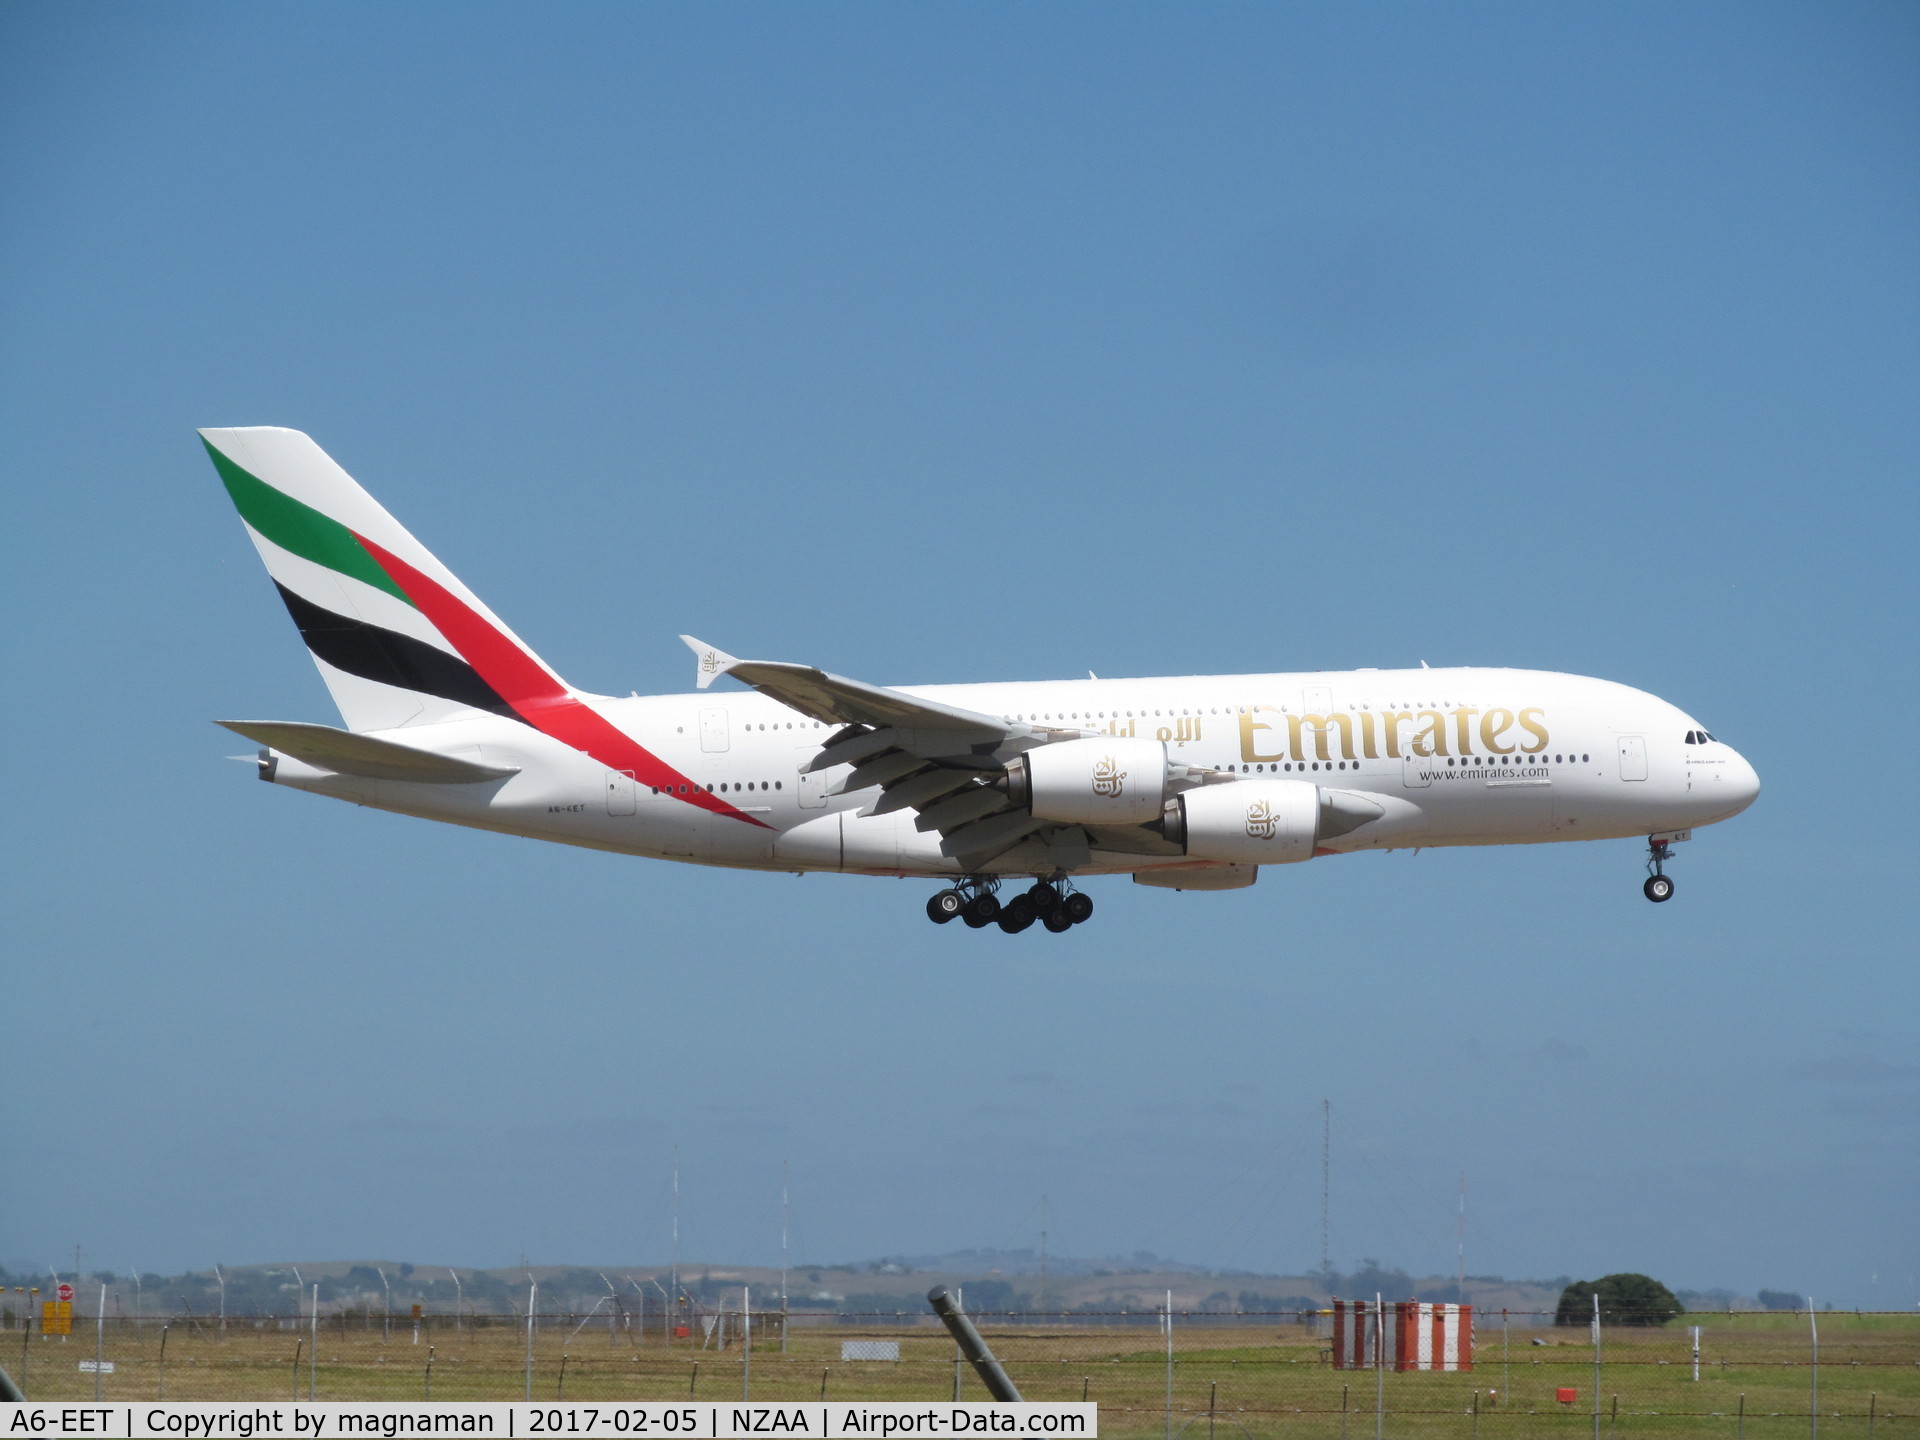 A6-EET, 2013 Airbus A380-861 C/N 142, over threshold of 23L